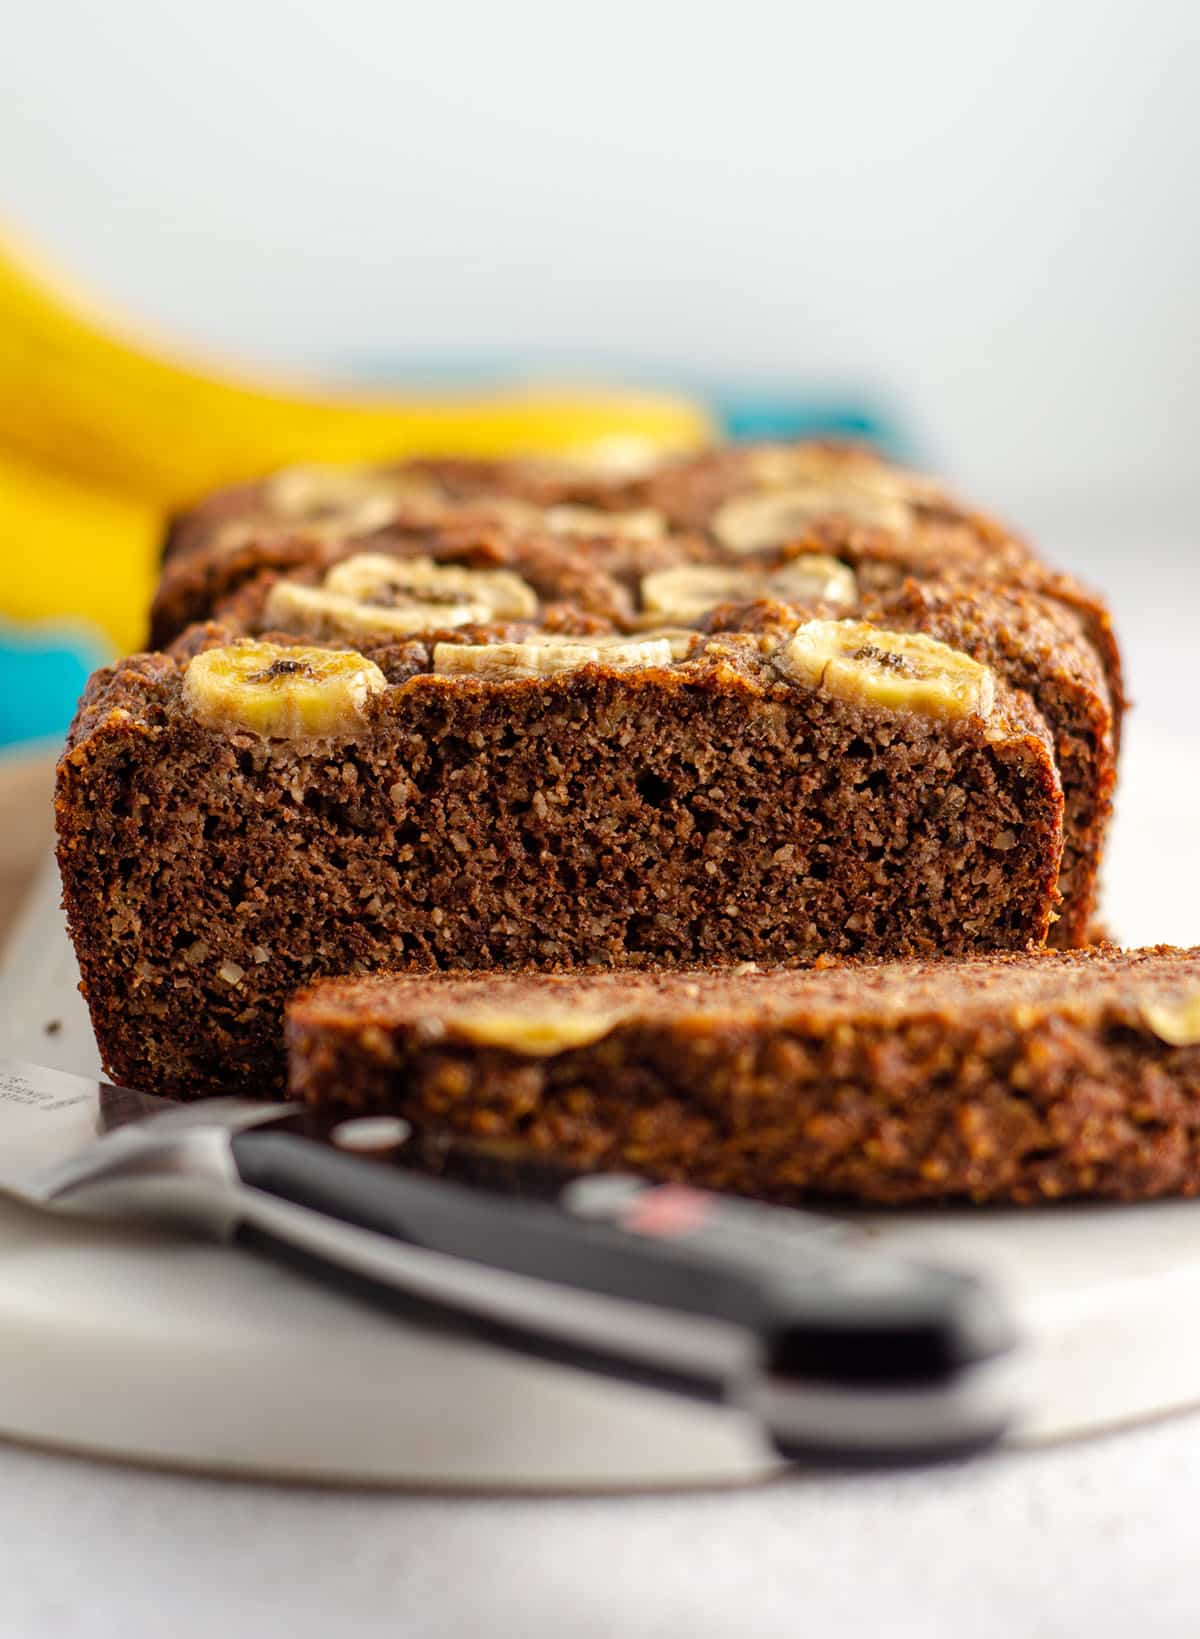 Almond Flour Banana Bread: Moist and flavorful banana bread made entirely with almond flour for a naturally gluten free quick bread.